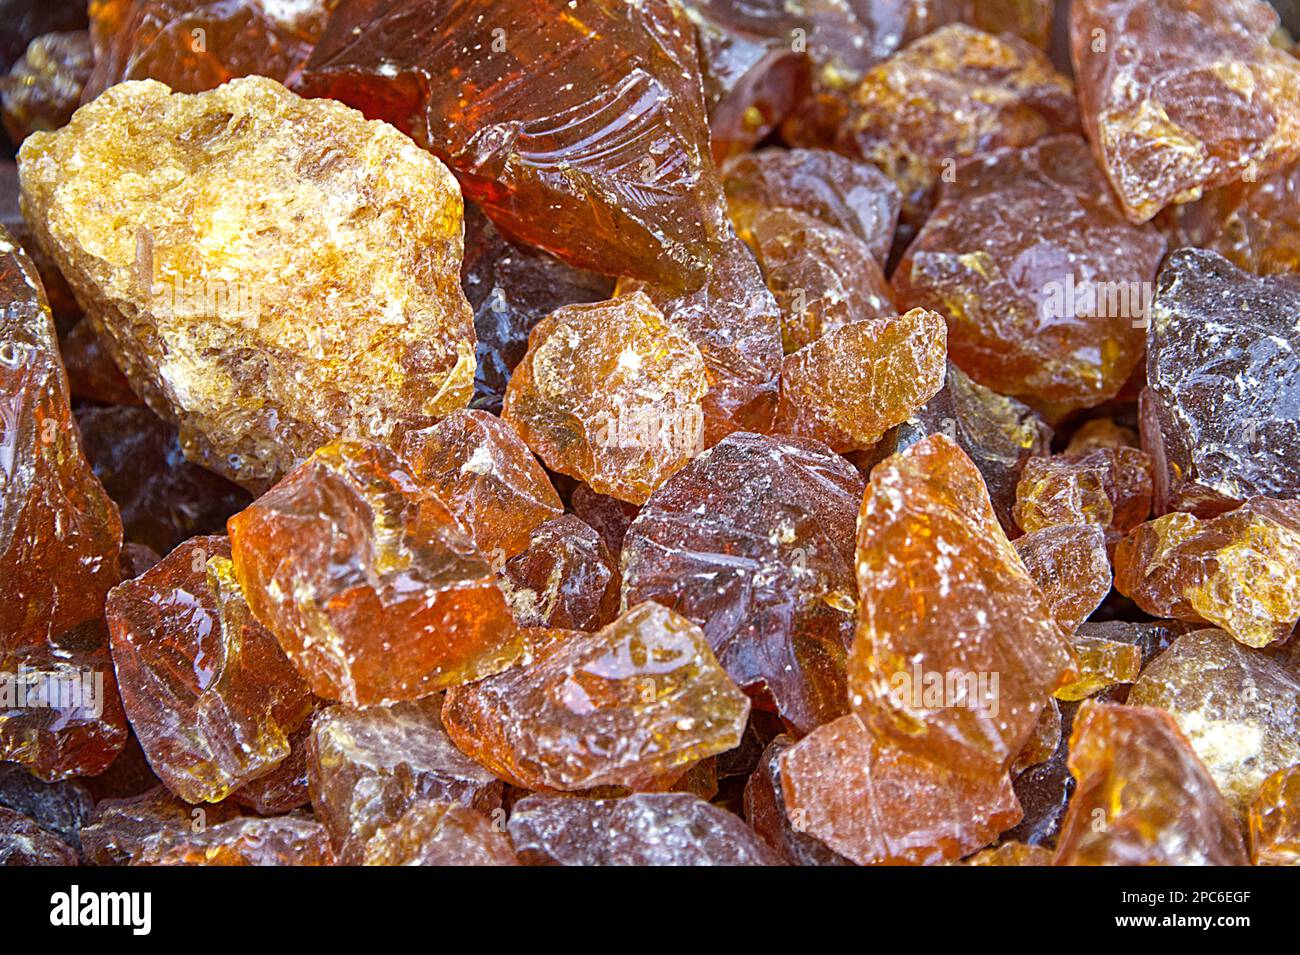 Many pieces of the natural product amber in orange color Stock Photo